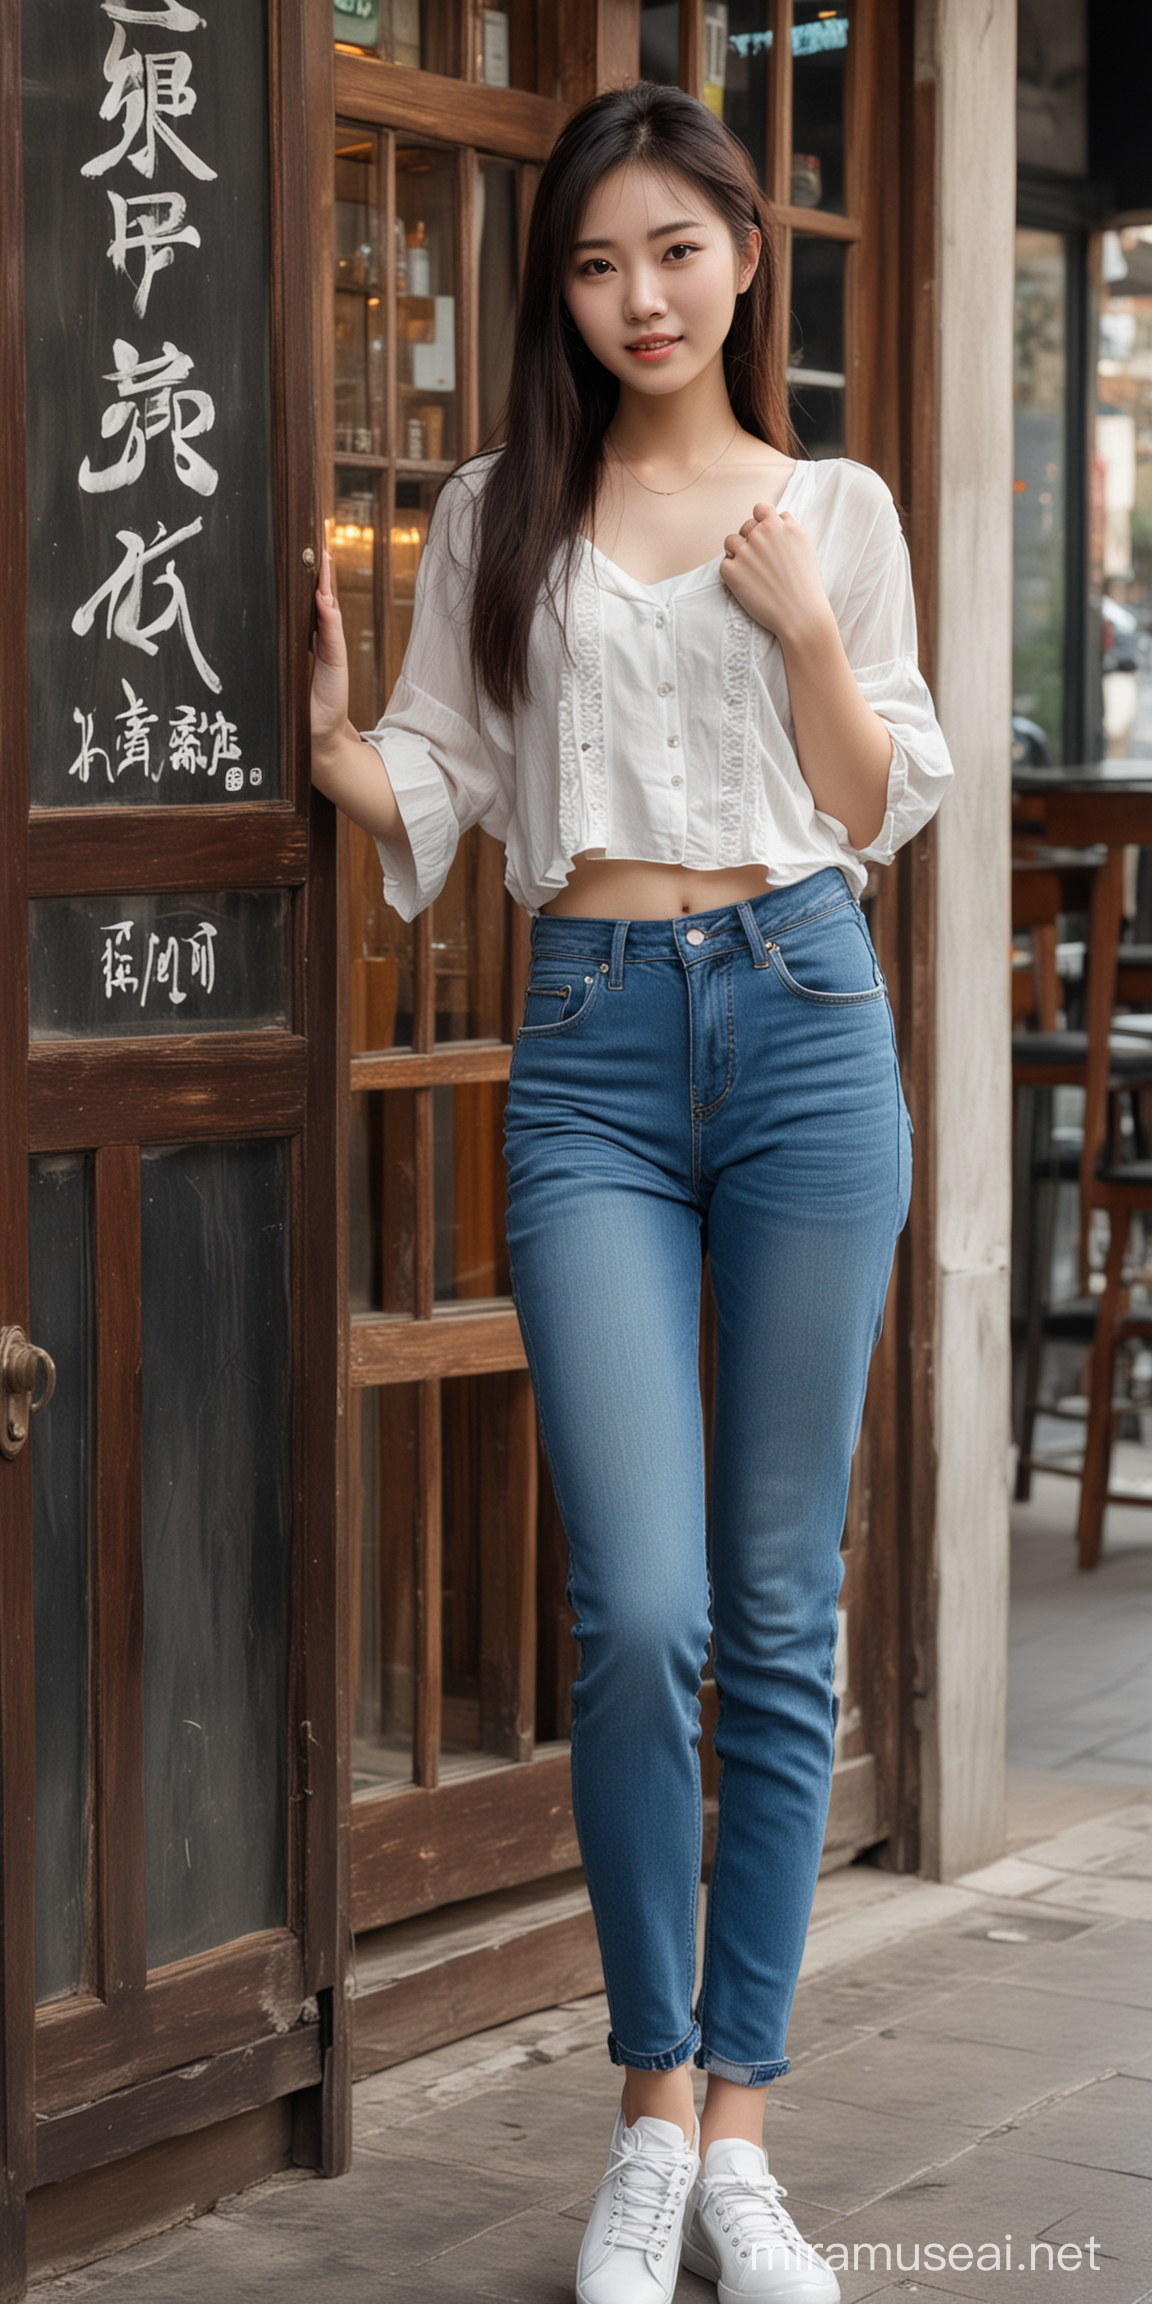 Stylish Chinese Beauty in Jeans at Bar Entrance